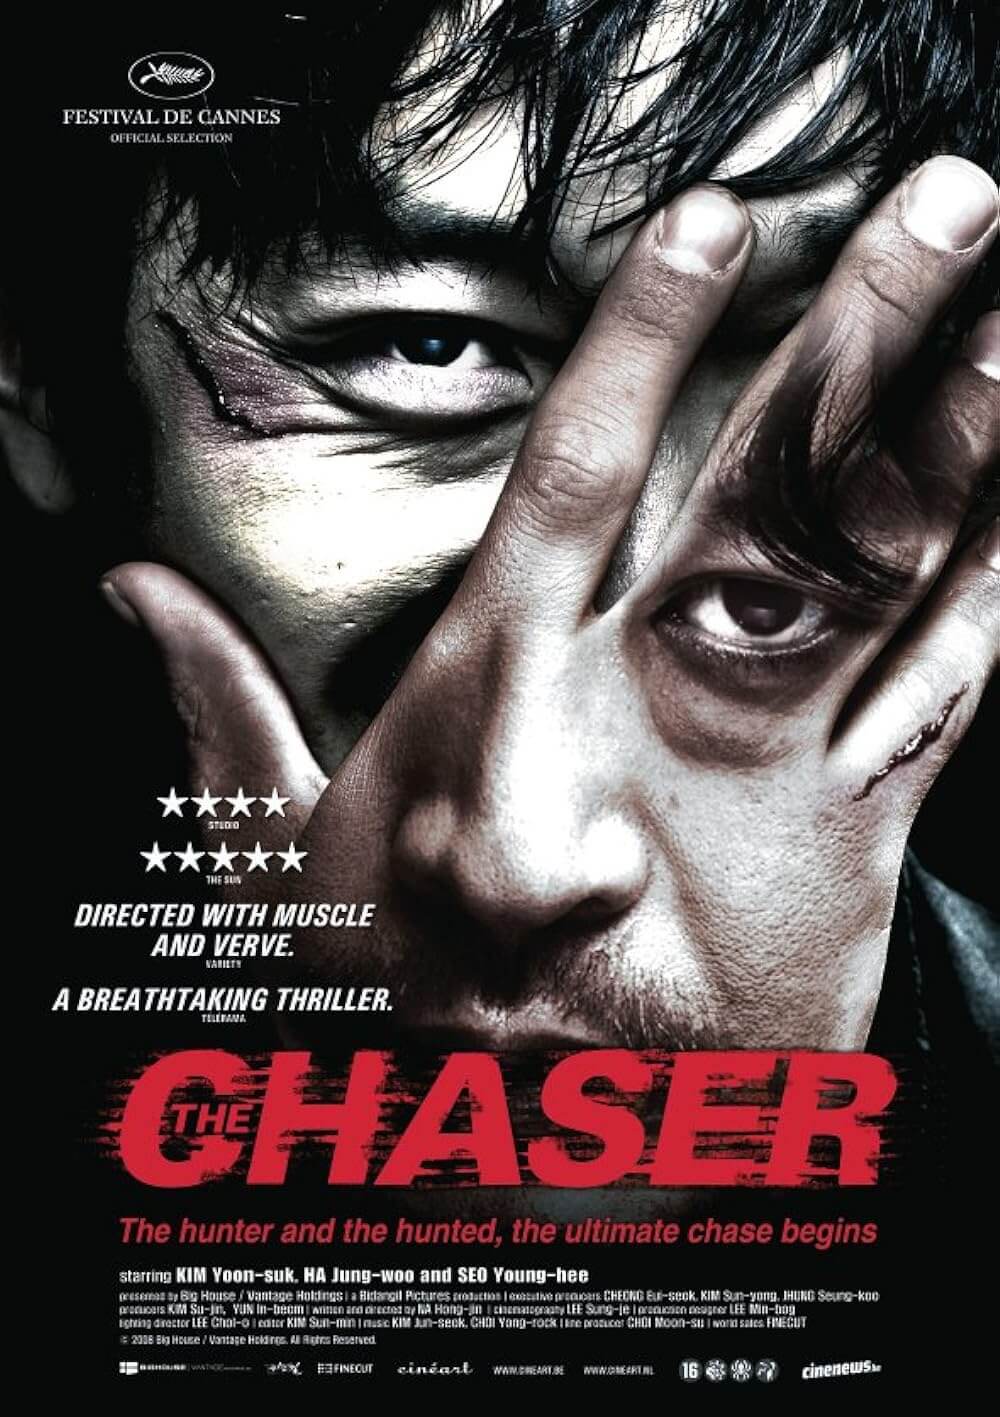 The Chaser Movie Poster